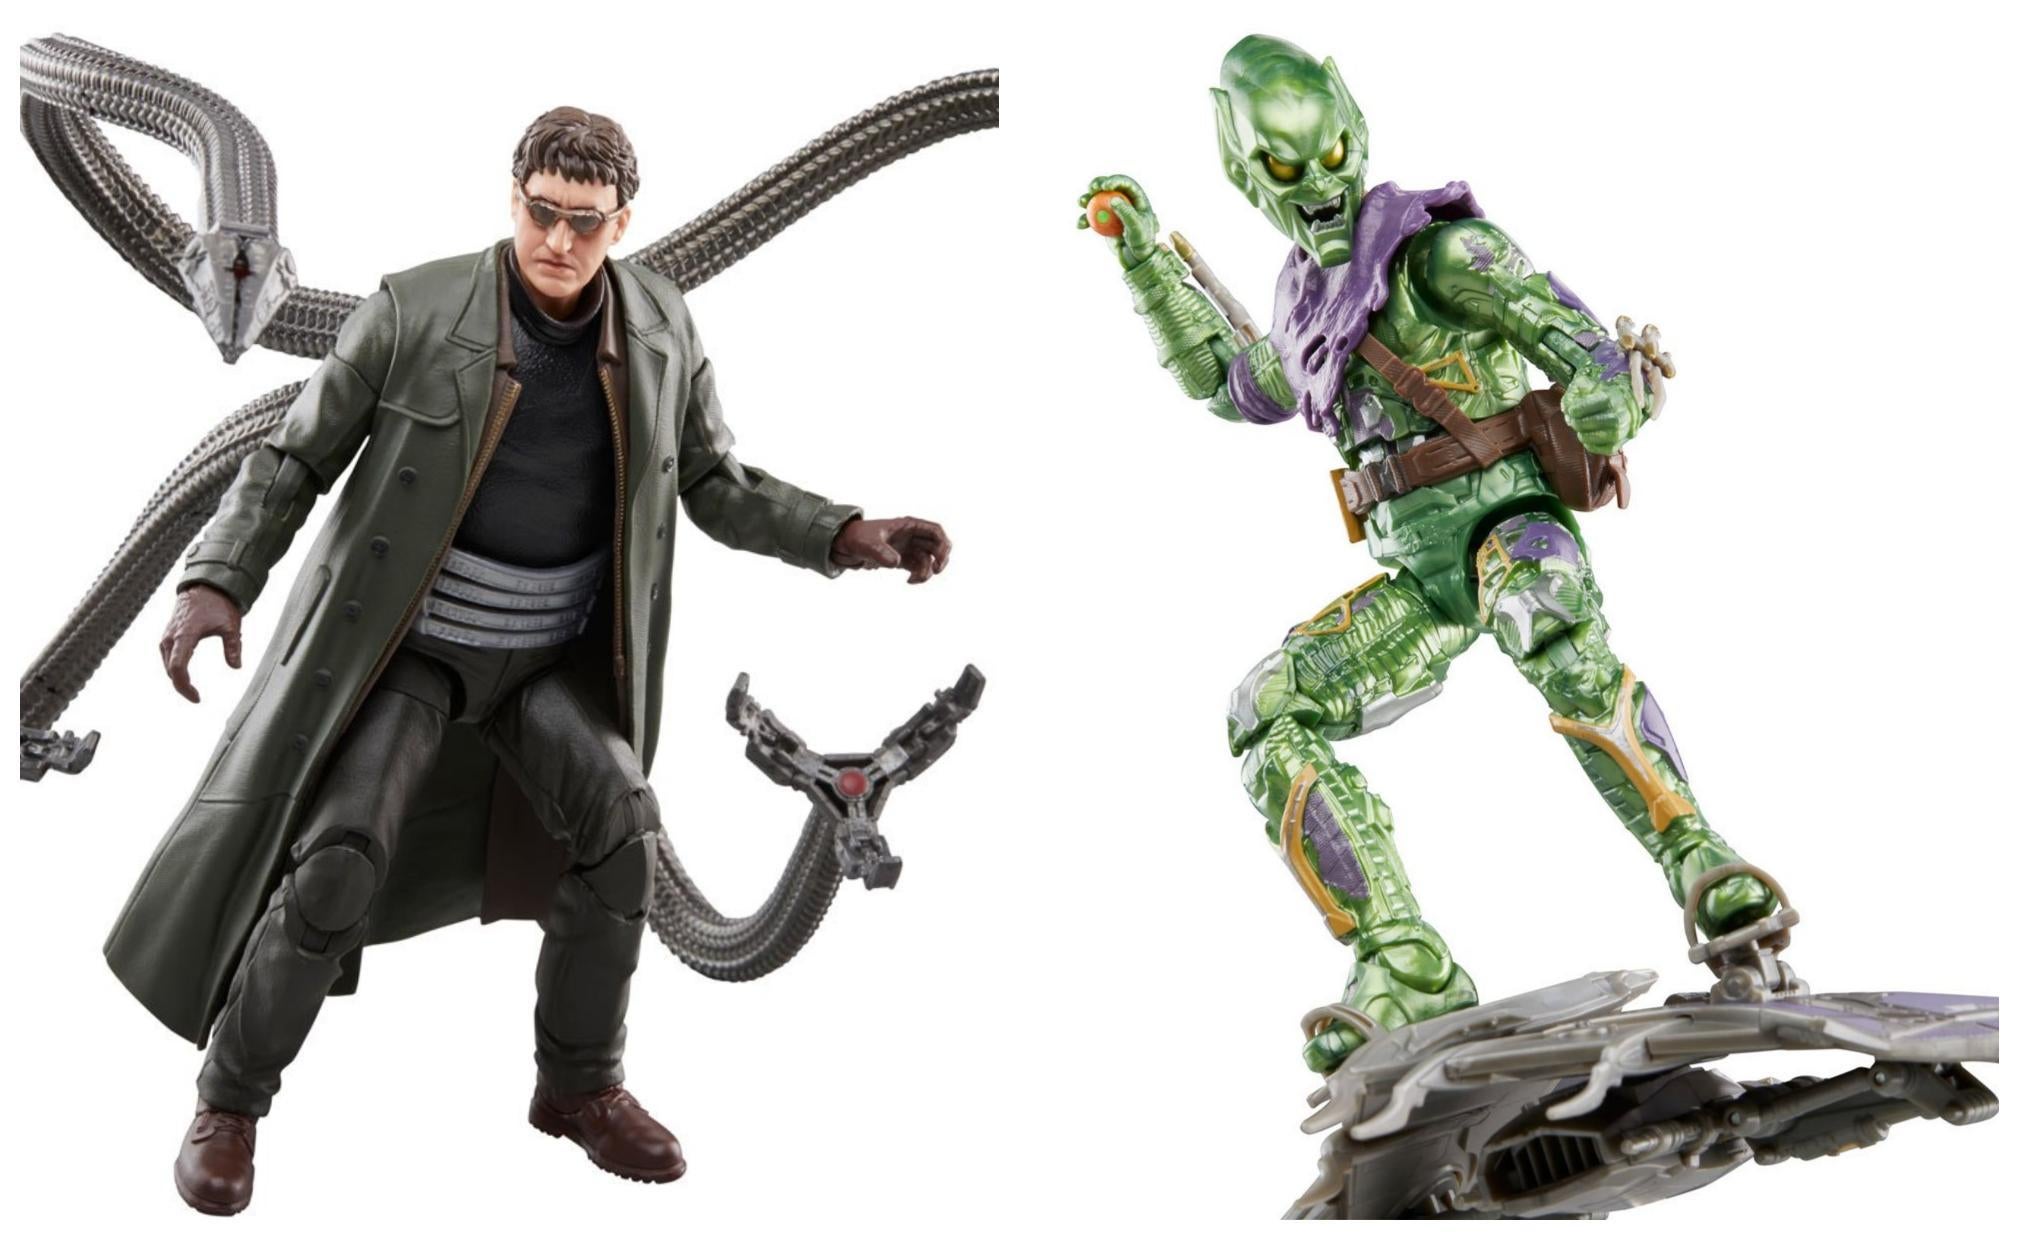 Petition · Make a NEW Marvel Legends Retro Dr. Octopus figure with